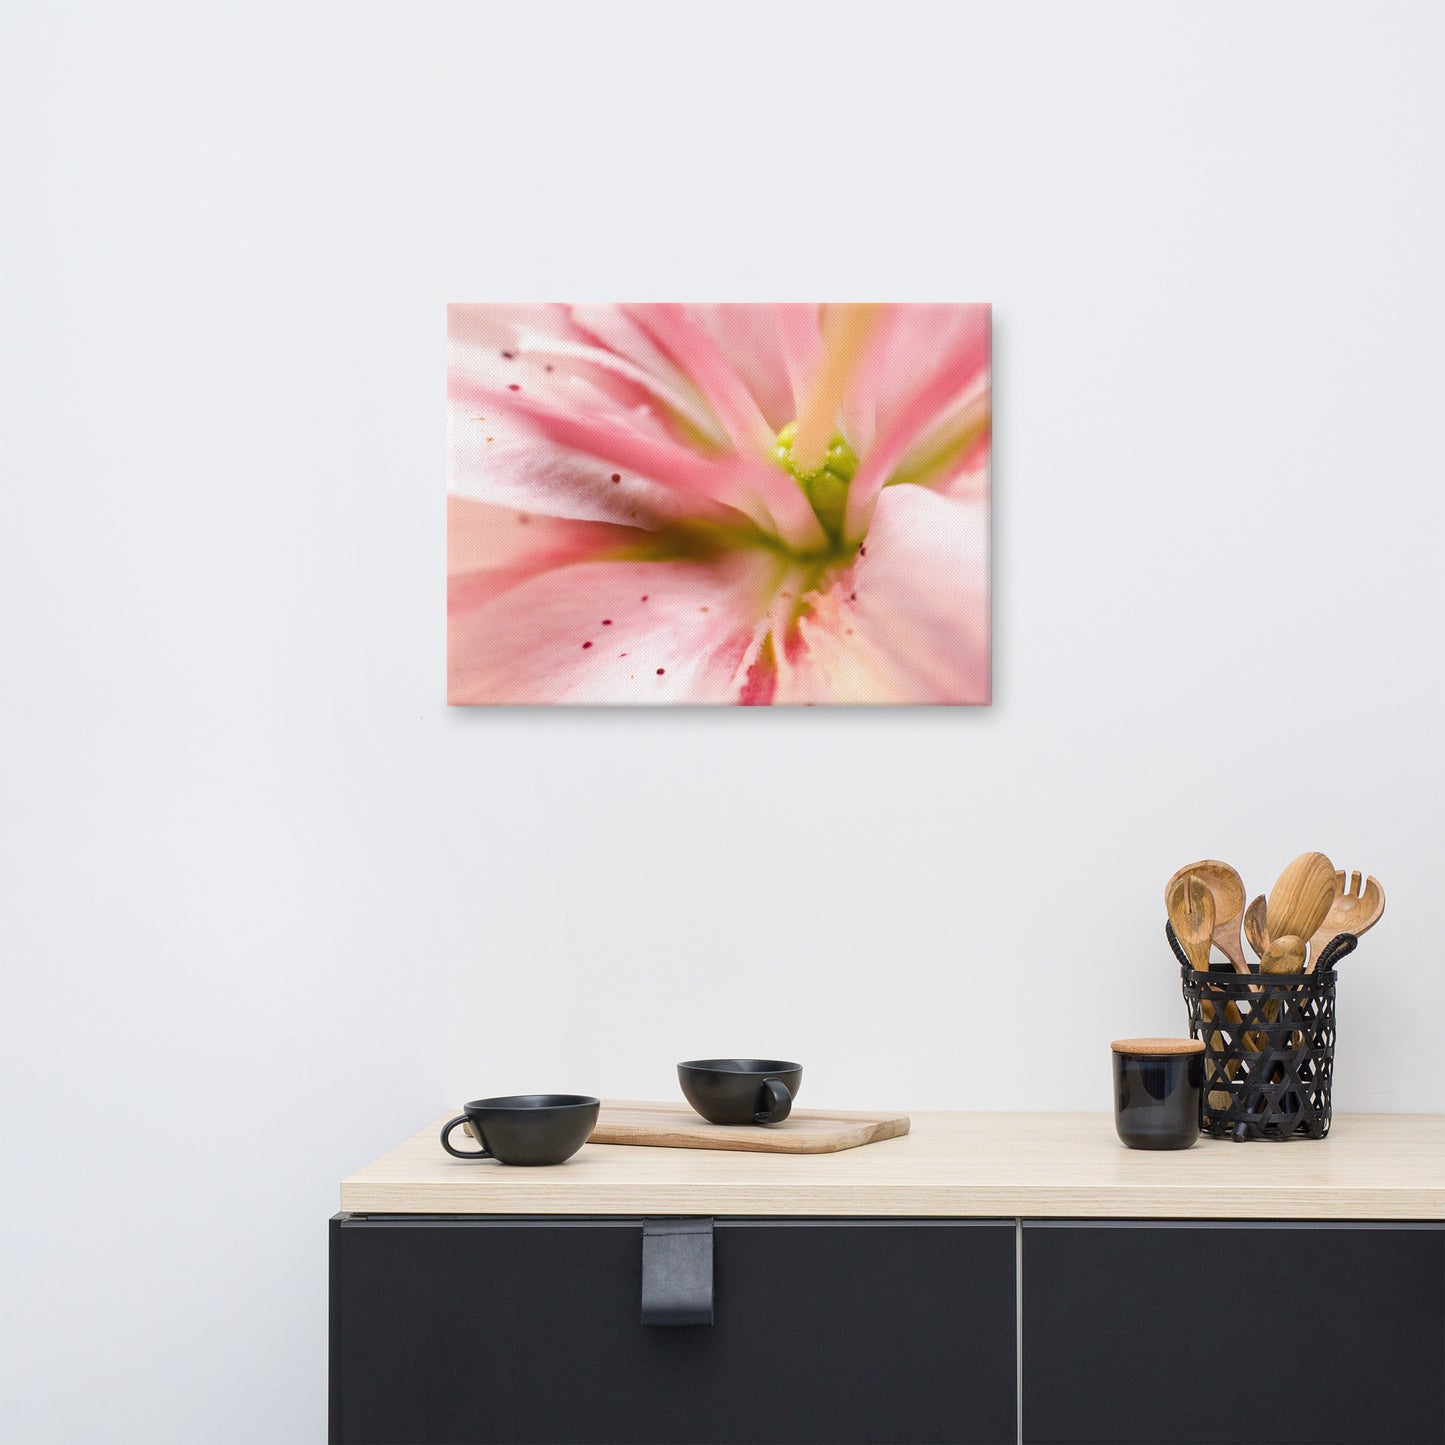 Center of the Stargazer Lily Floral Nature Canvas Wall Art Prints